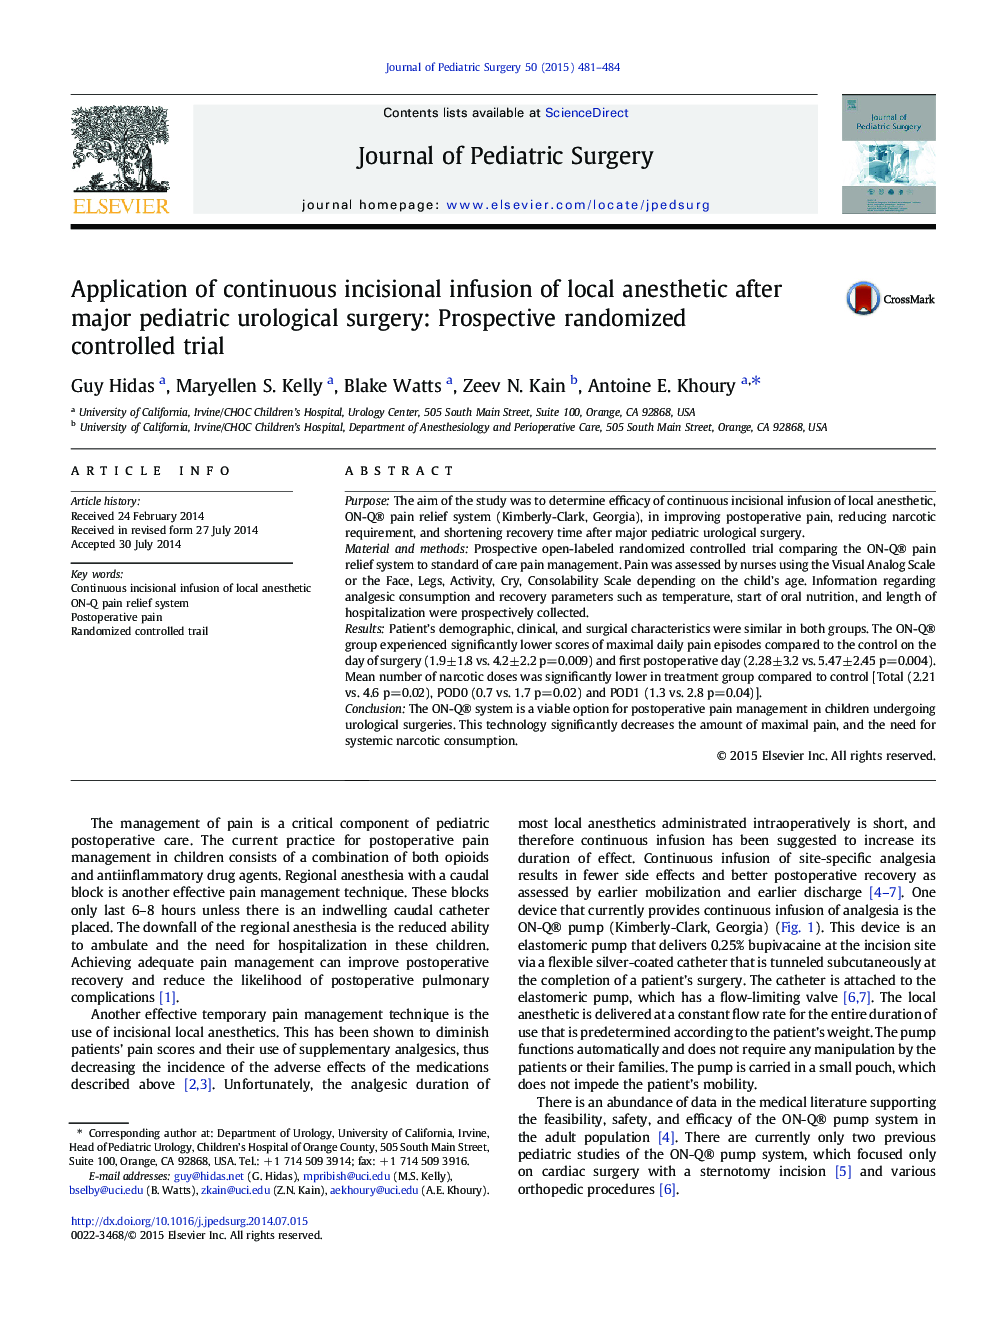 Application of continuous incisional infusion of local anesthetic after major pediatric urological surgery: Prospective randomized controlled trial